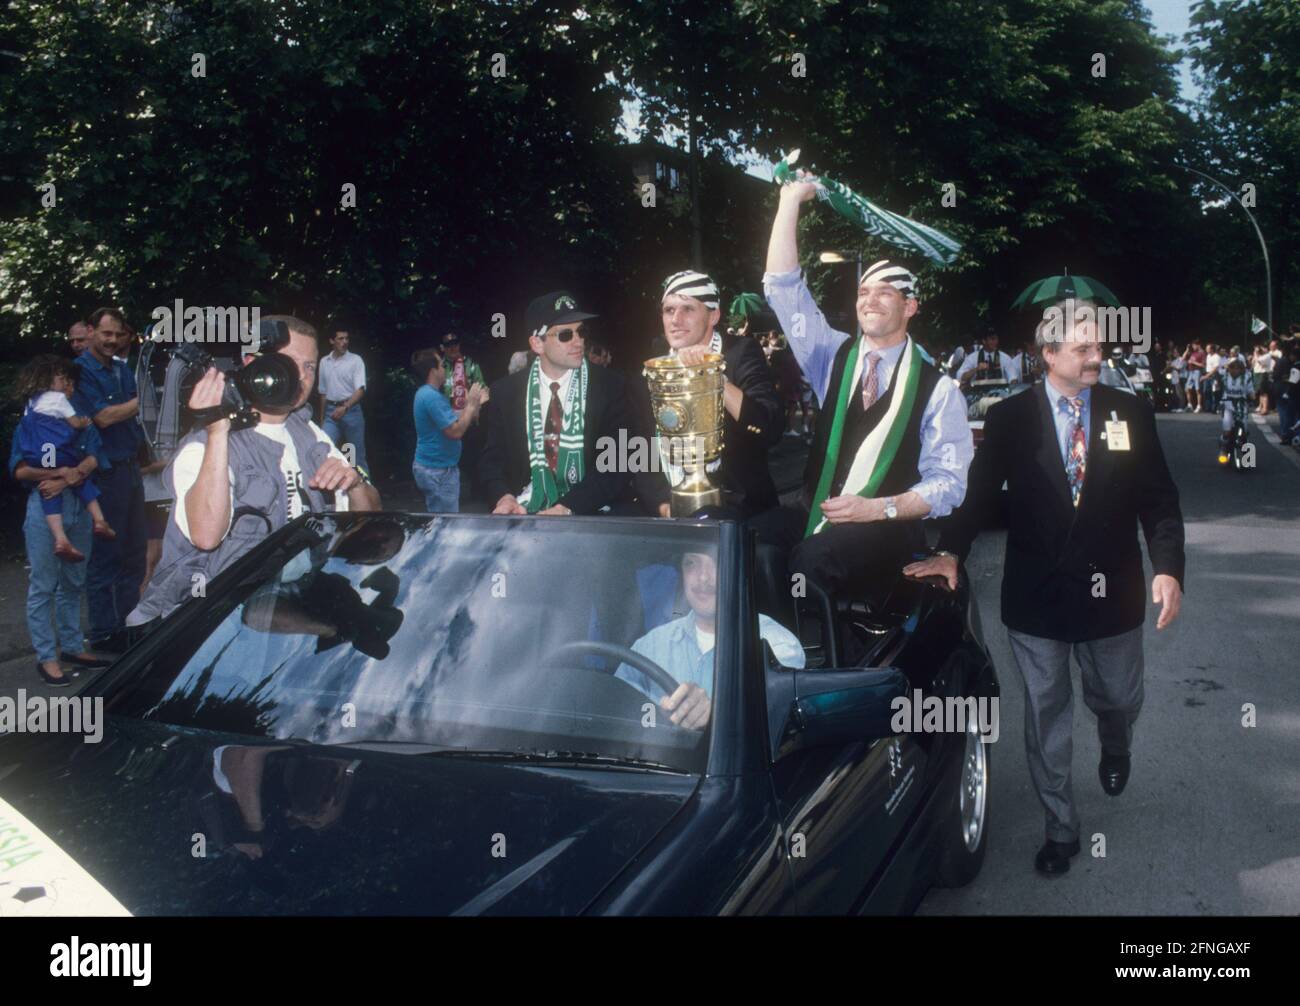 Moving Borussia Mönchengladbach as DFB cup winner 1995. the Gladbacher players in the convertible with cup 25.06.1995. V.l: Christian Hochstätter, Michael Klinkert (with cup) and Uwe Kamps. [automated translation] Stock Photo